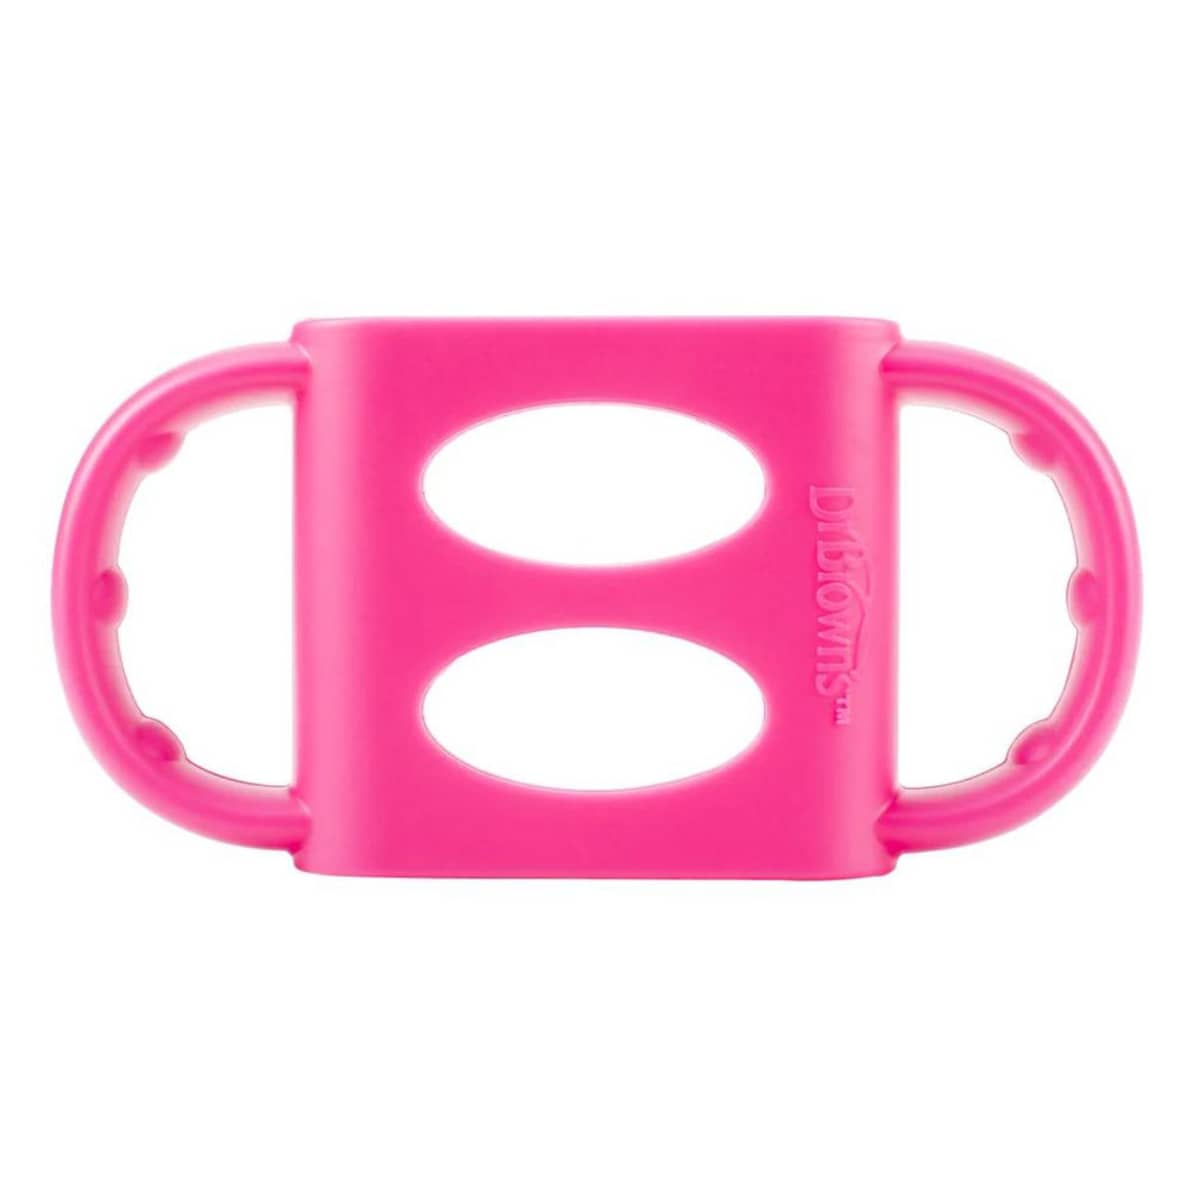 Dr Browns Standard Silicone Handles - Pink